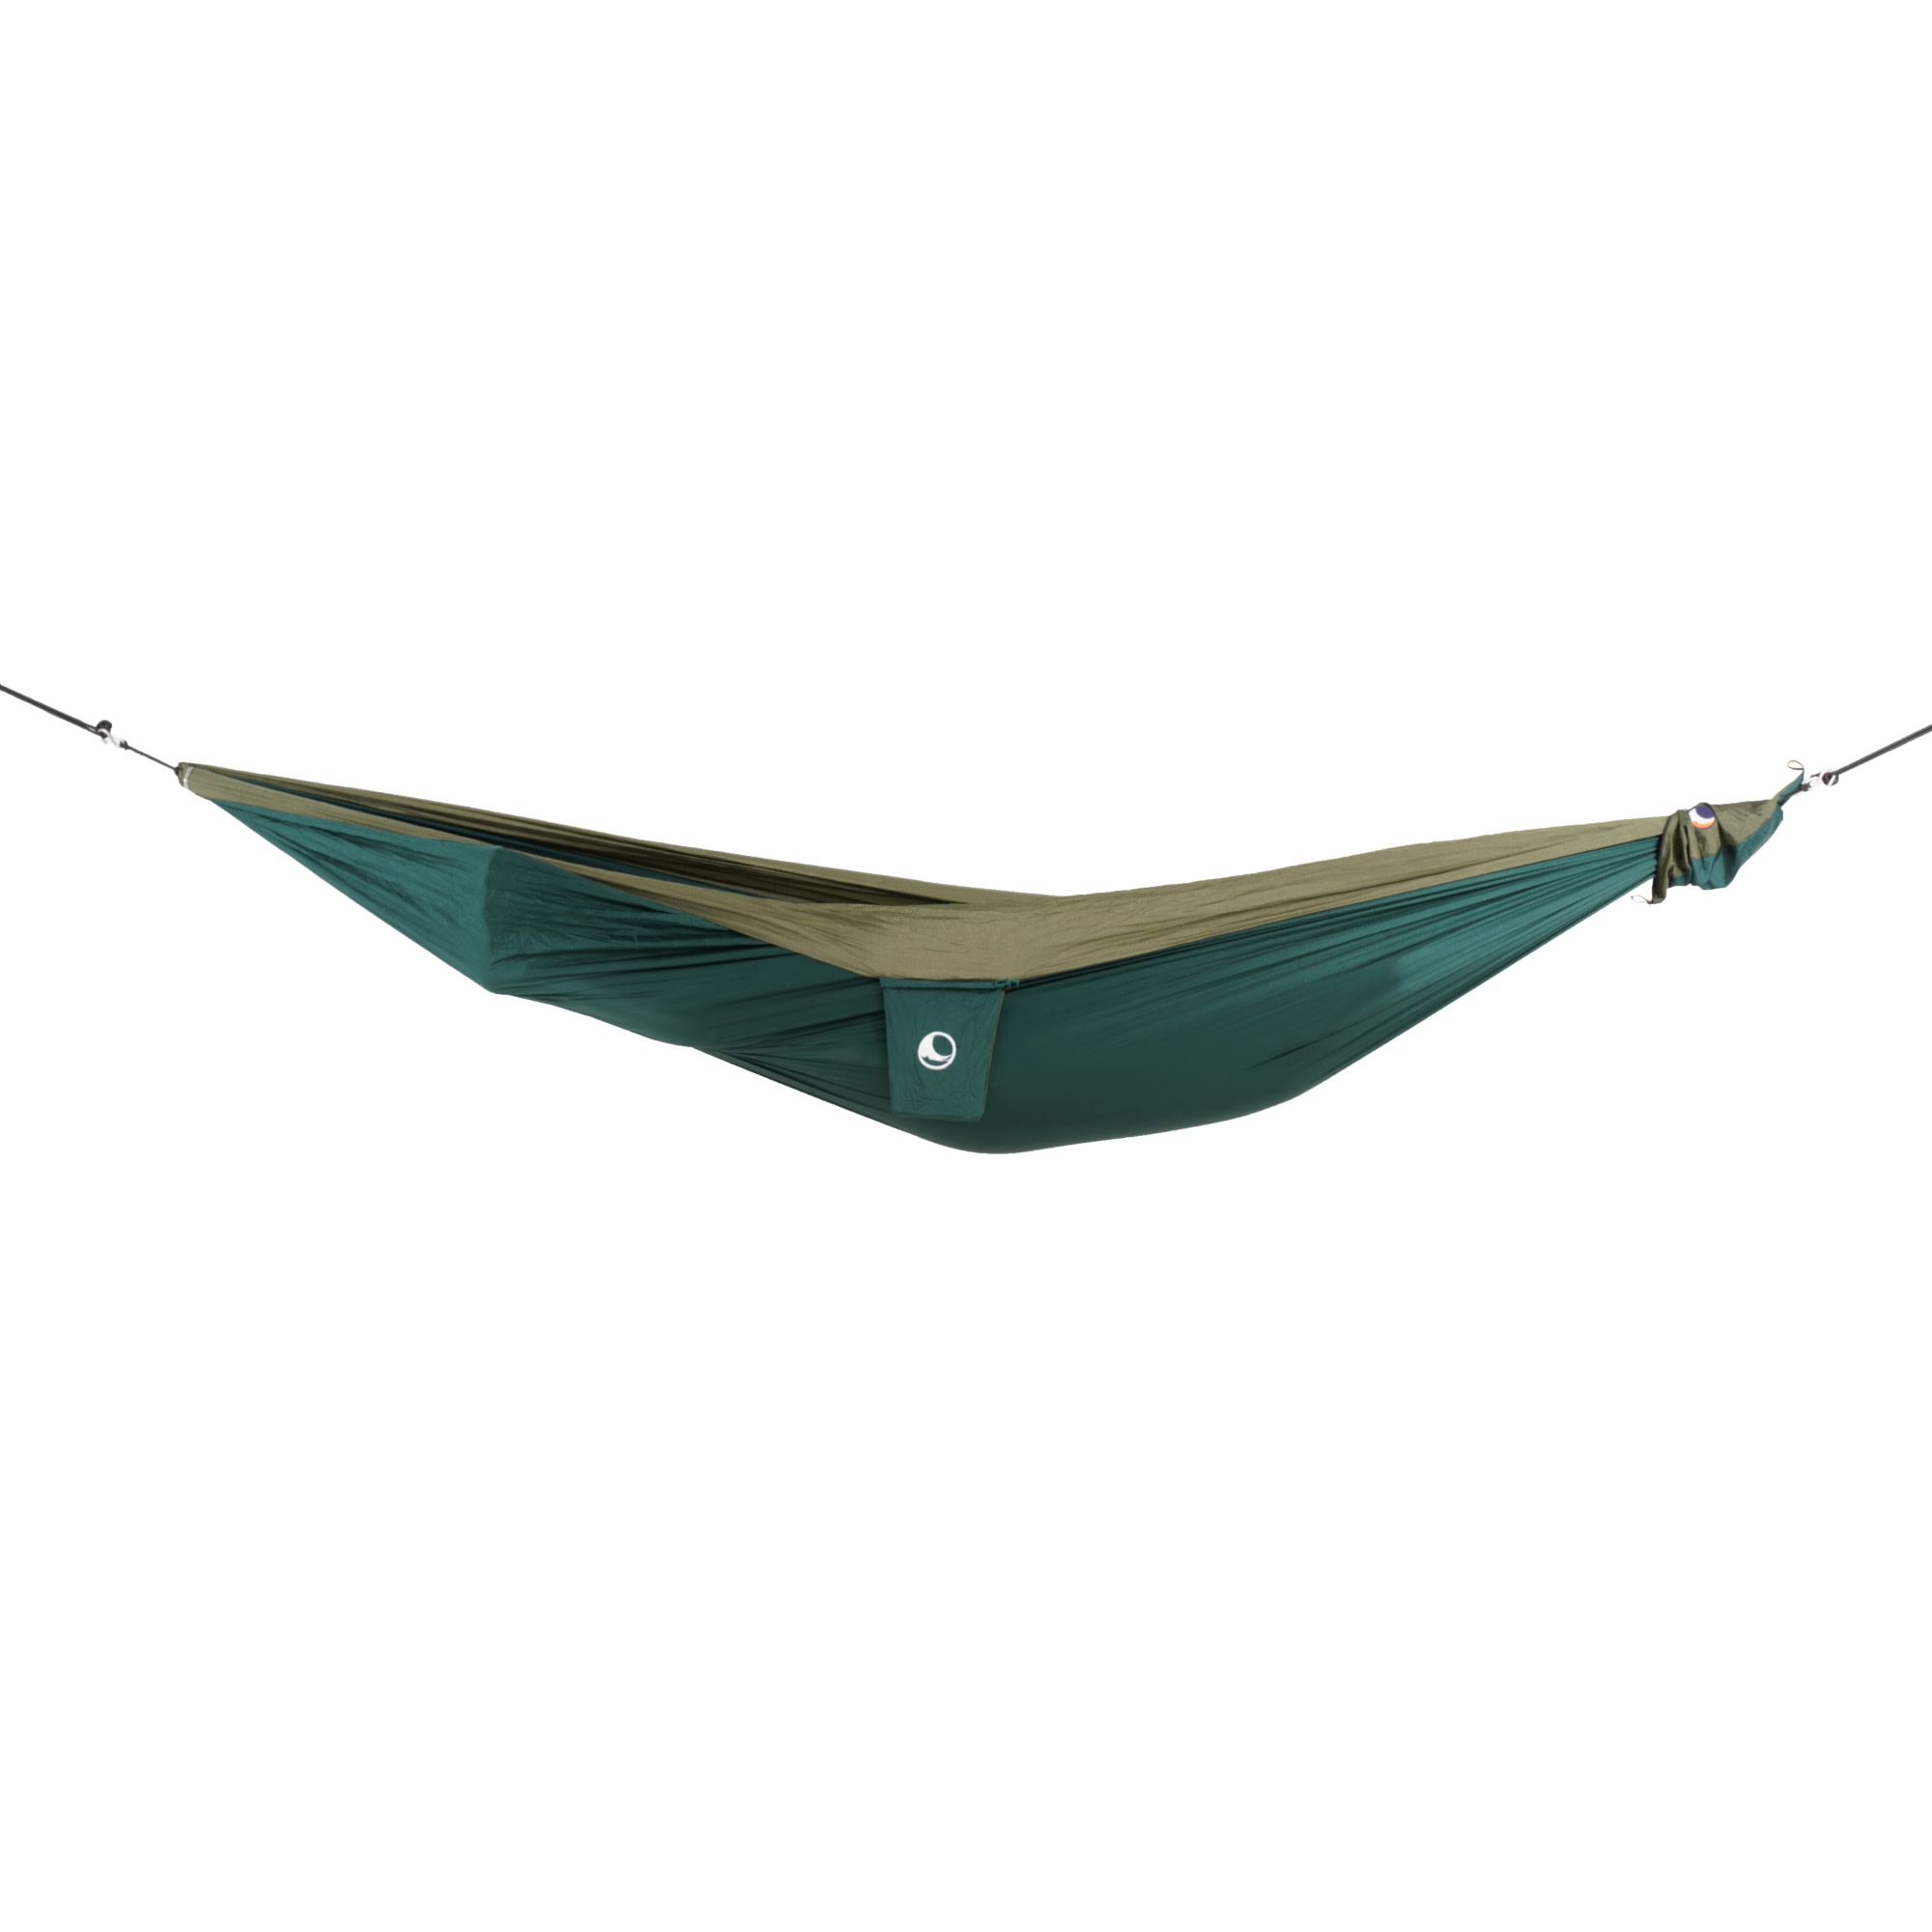 Ticket to the Moon King Size Hammock Forest/Army Green